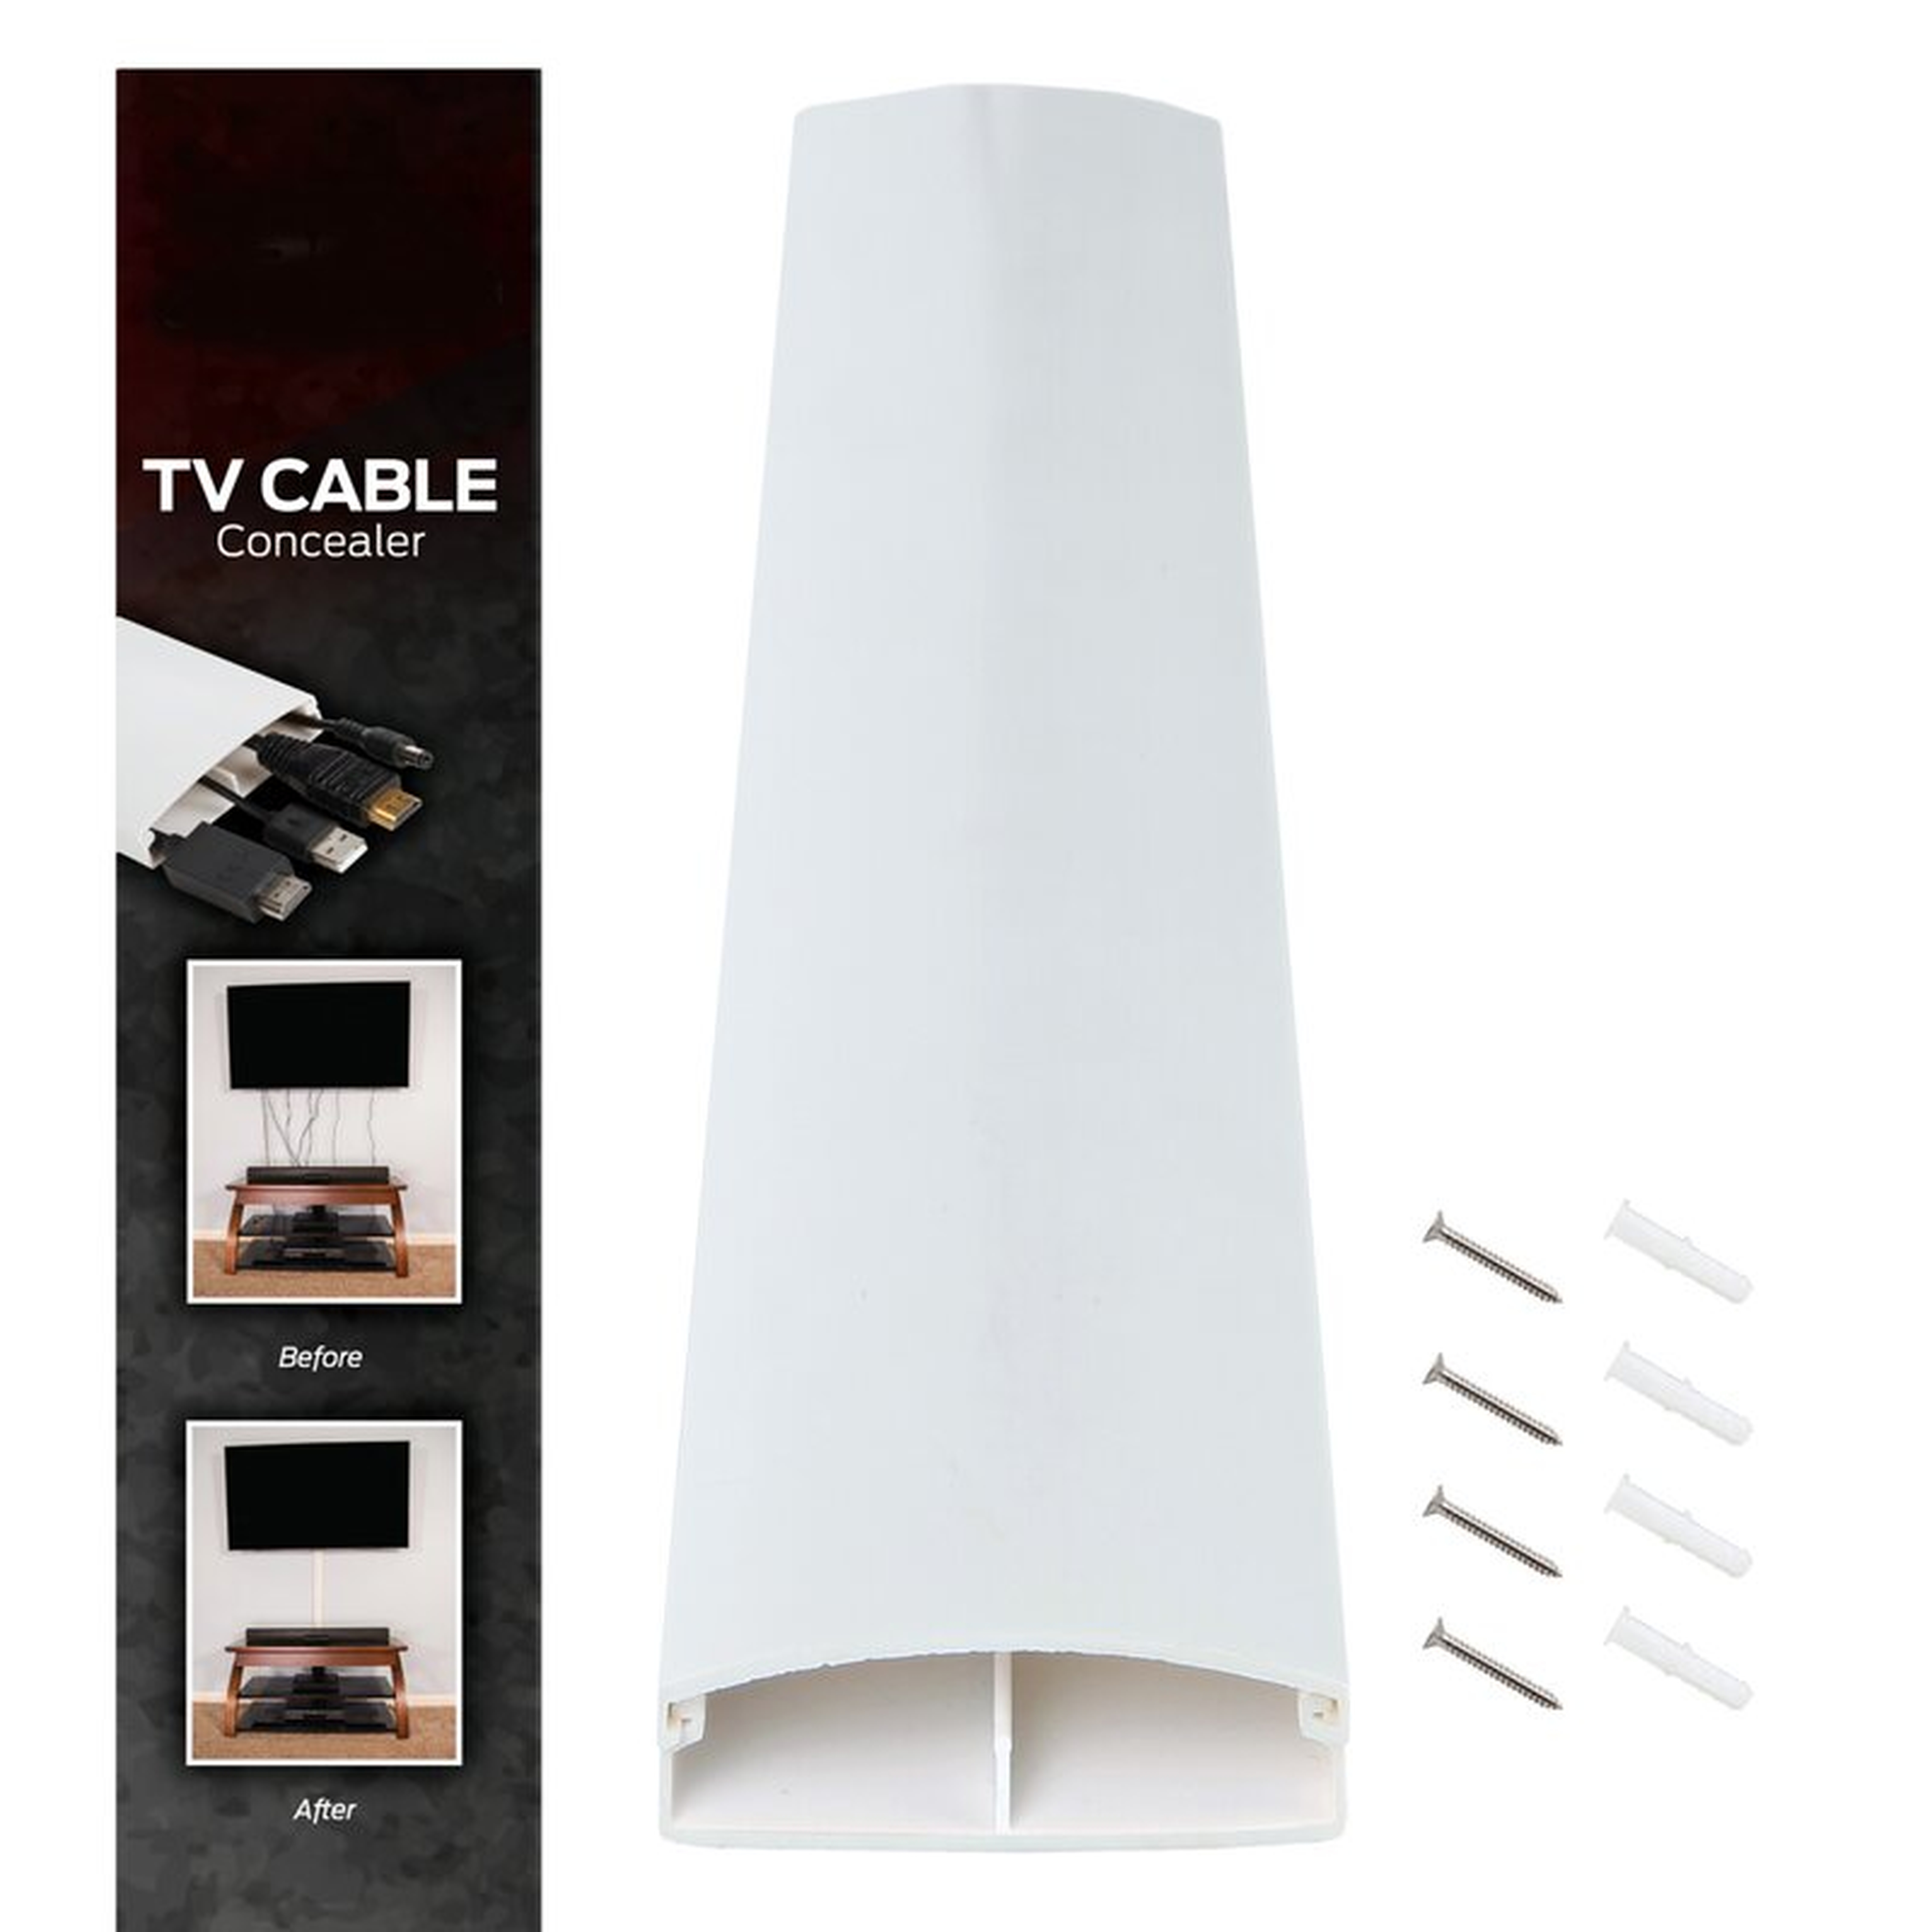 TV Cord Cover Conceals Cable - Wayfair